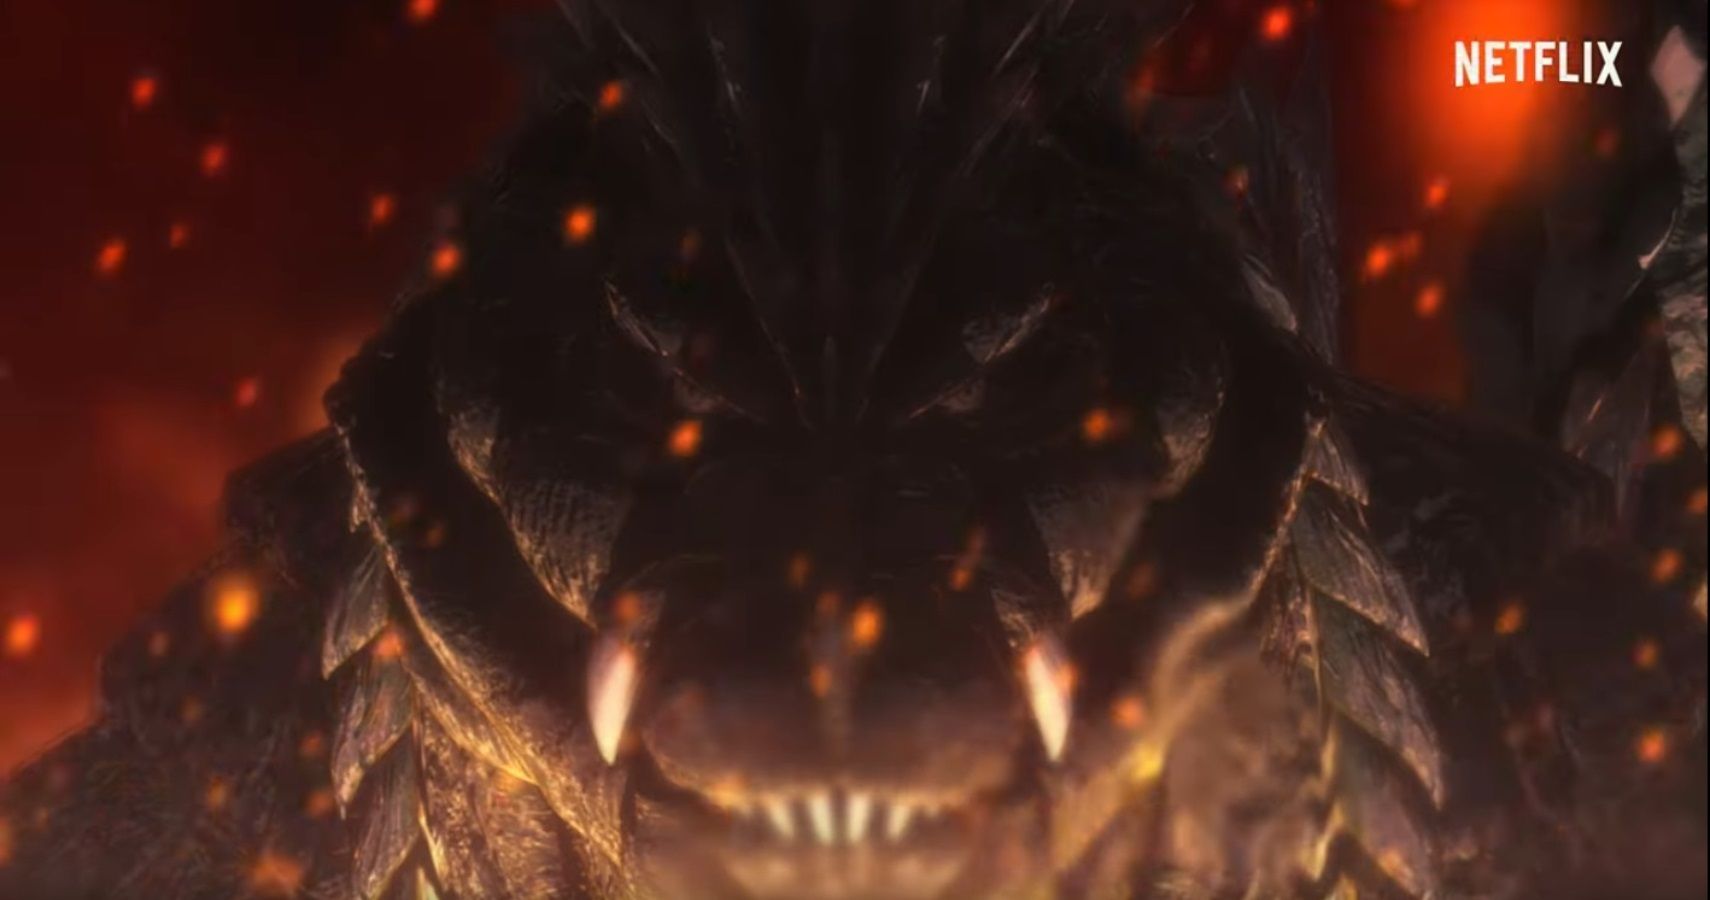 The Godzilla Singular Point Anime Is Coming To Netflix In June